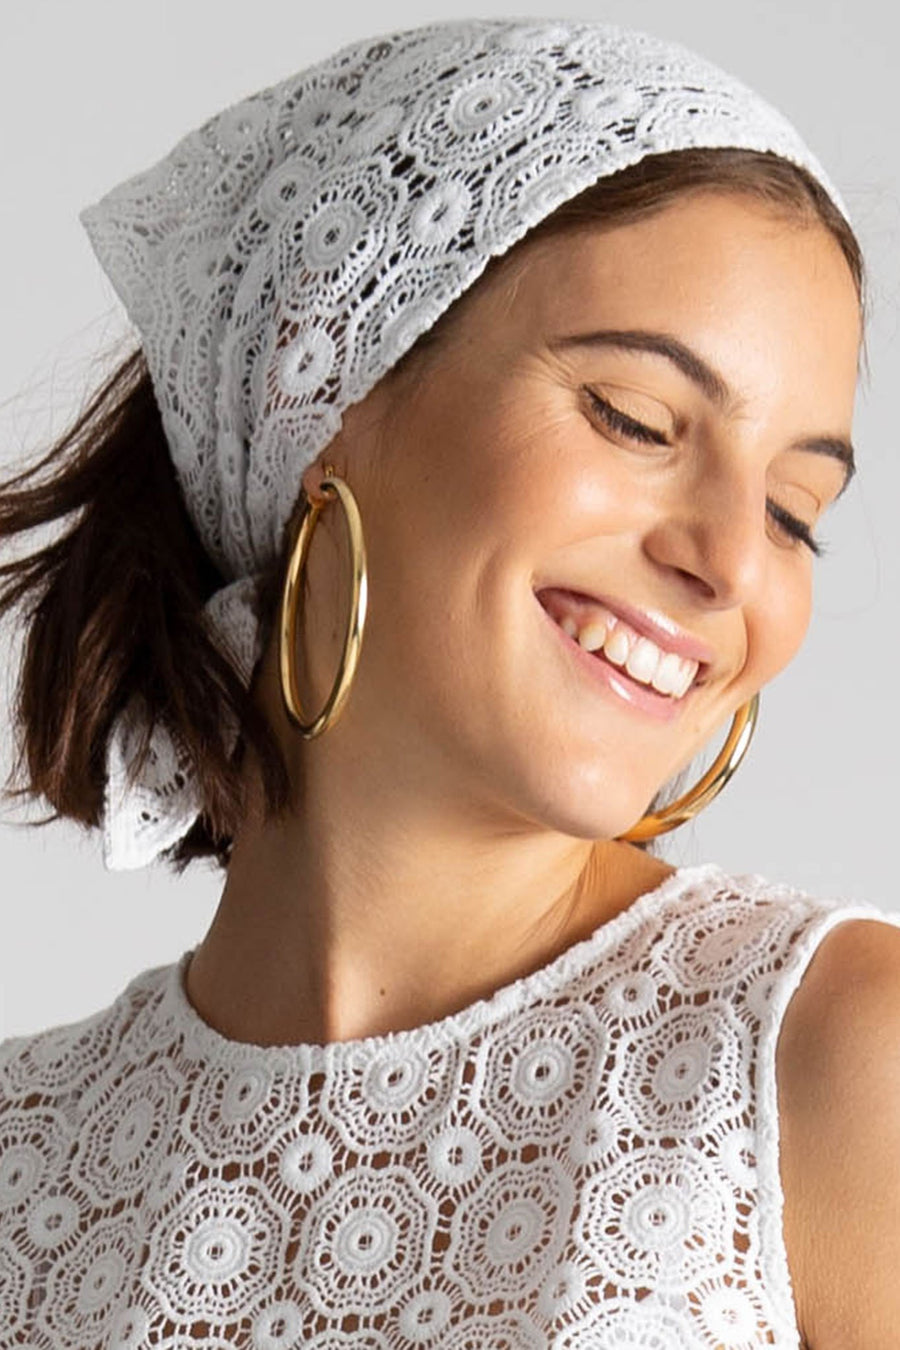 This is a photo of a girl wearing a lace headscarf with gold hoops and matching lace crop top. She smiles and looks over her shoulder.